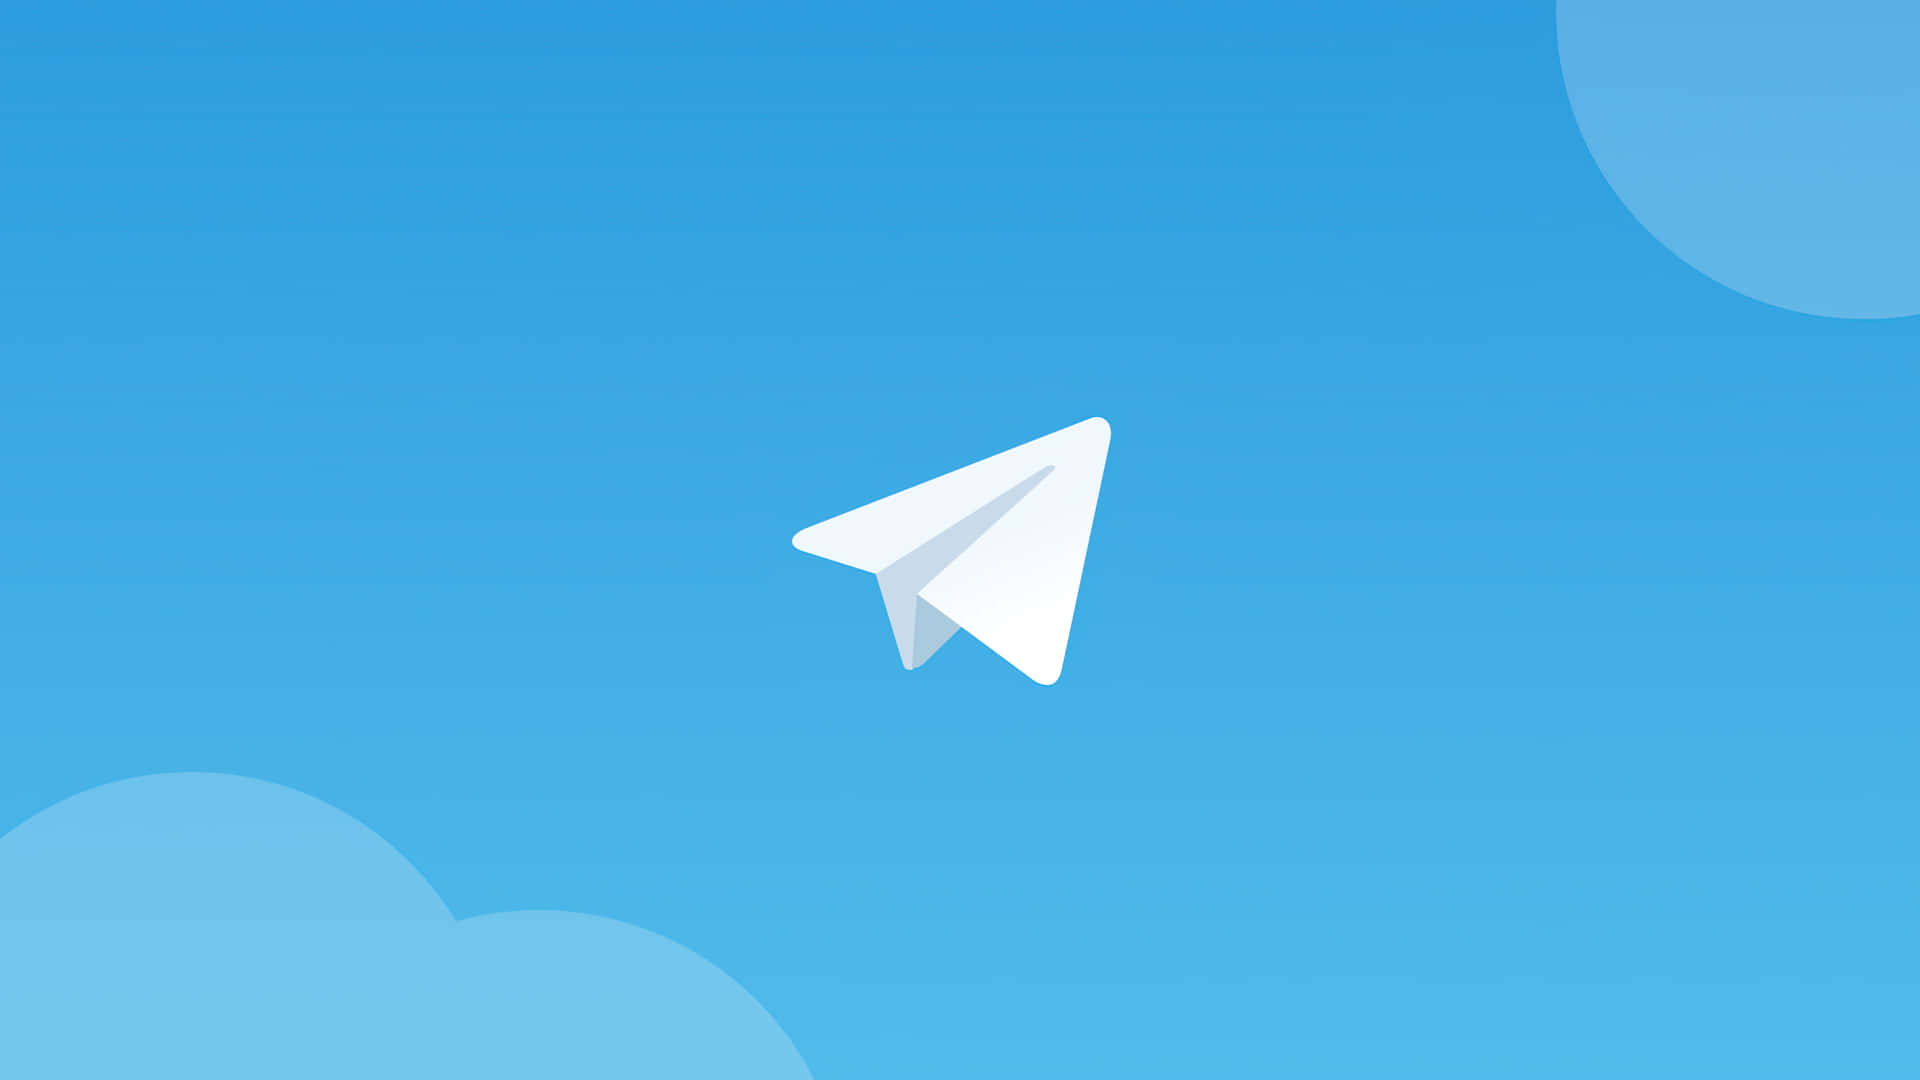 Unlock the power of fast, secure and private messaging with Telegram